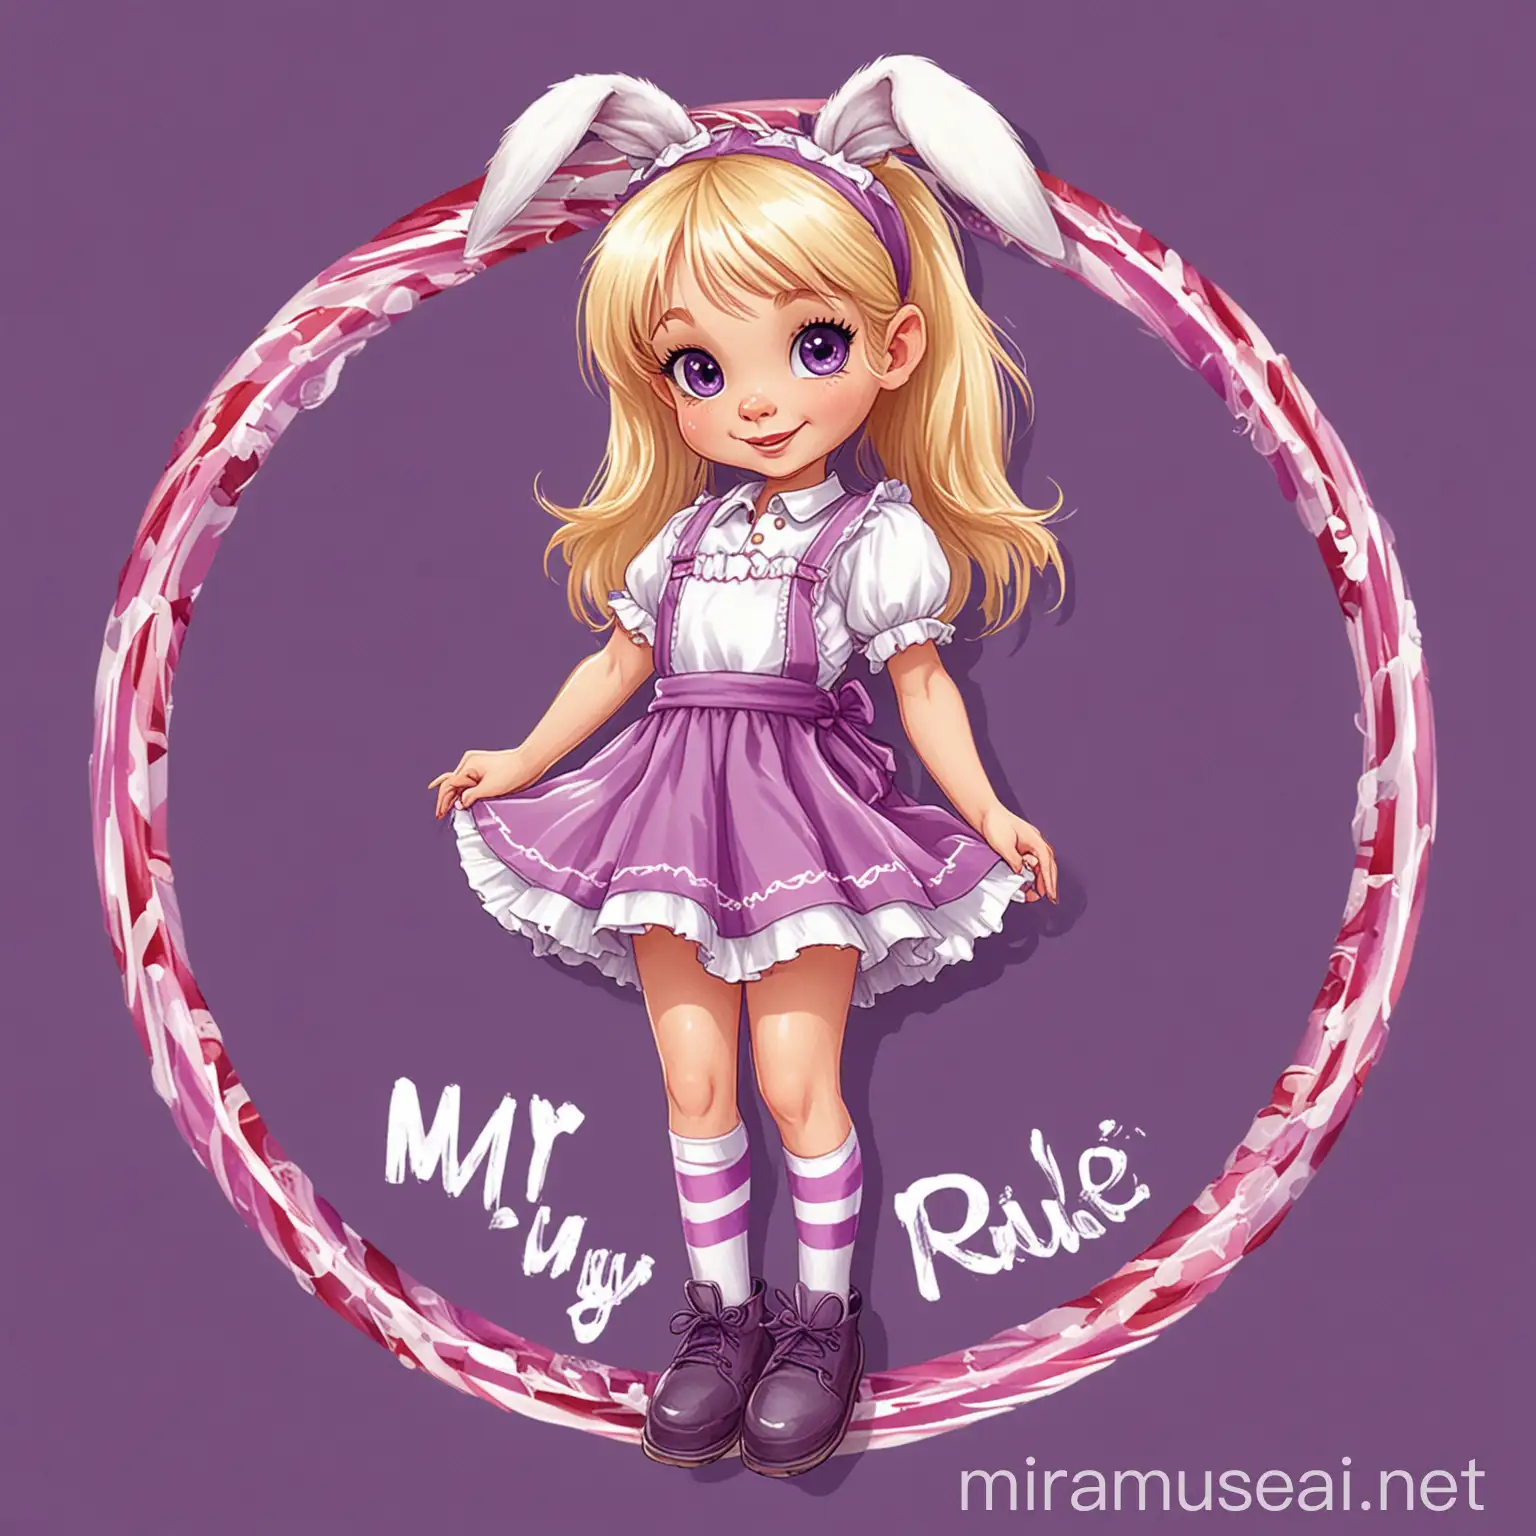 Circle logo for children story book that has a title 'my body, my rule'.
little blond girl with bunny ears, purple knee long skirt with white apron.
Purple and white candy cane stockings.
Cartoon style